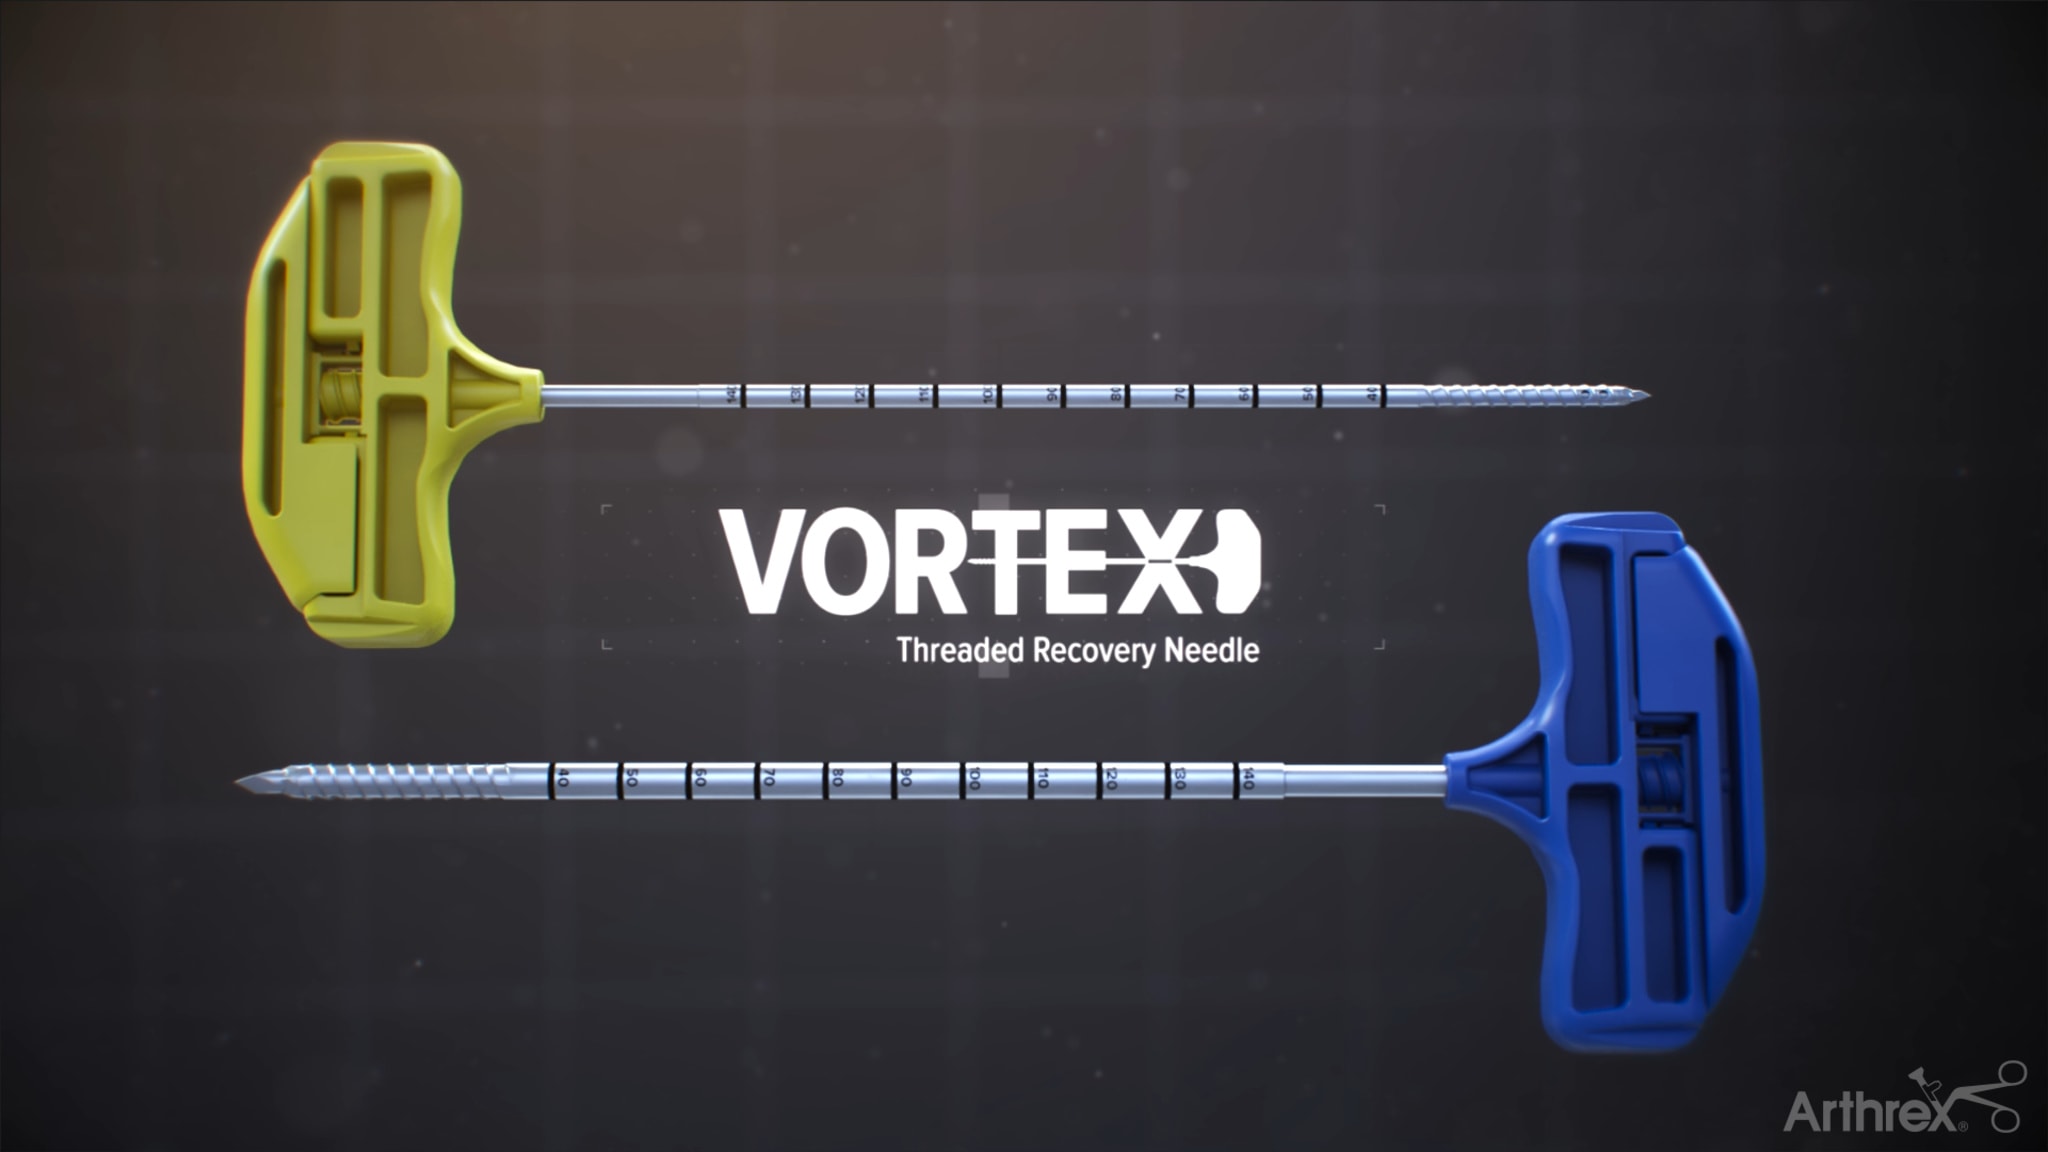 Vortex™ Threaded Bone Marrow Recovery Needle for Aspiration From the Posterior Superior Iliac Spine